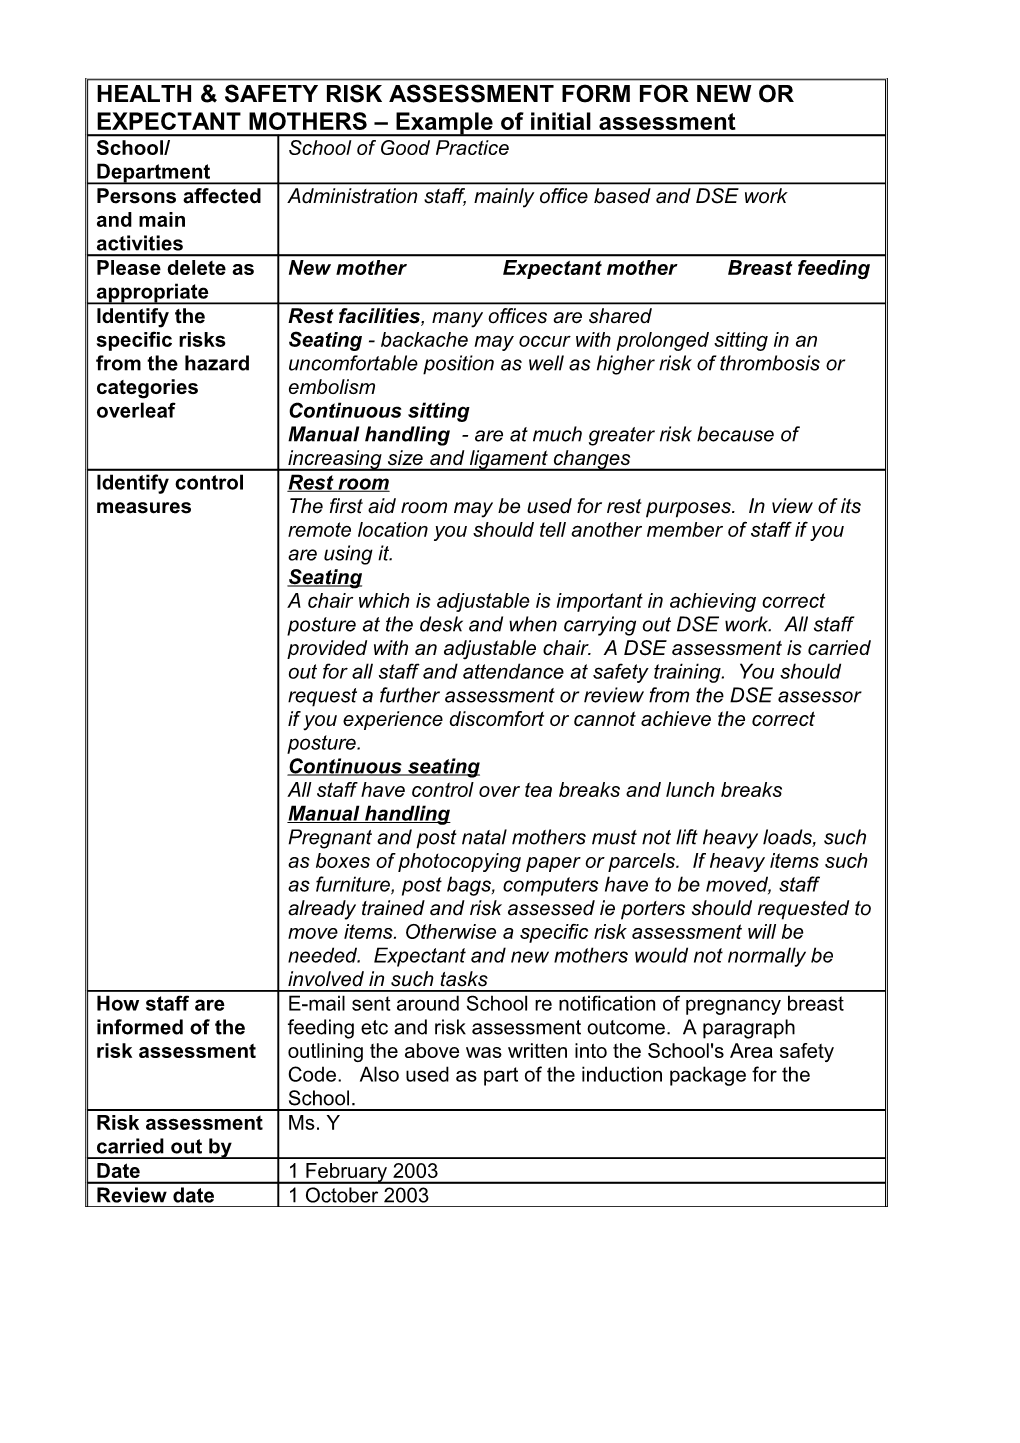 HEALTH & SAFETY RISK ASSESSMENT FORM for NEW OR EXPECTANT MOTHERS Example of Initial Assessment